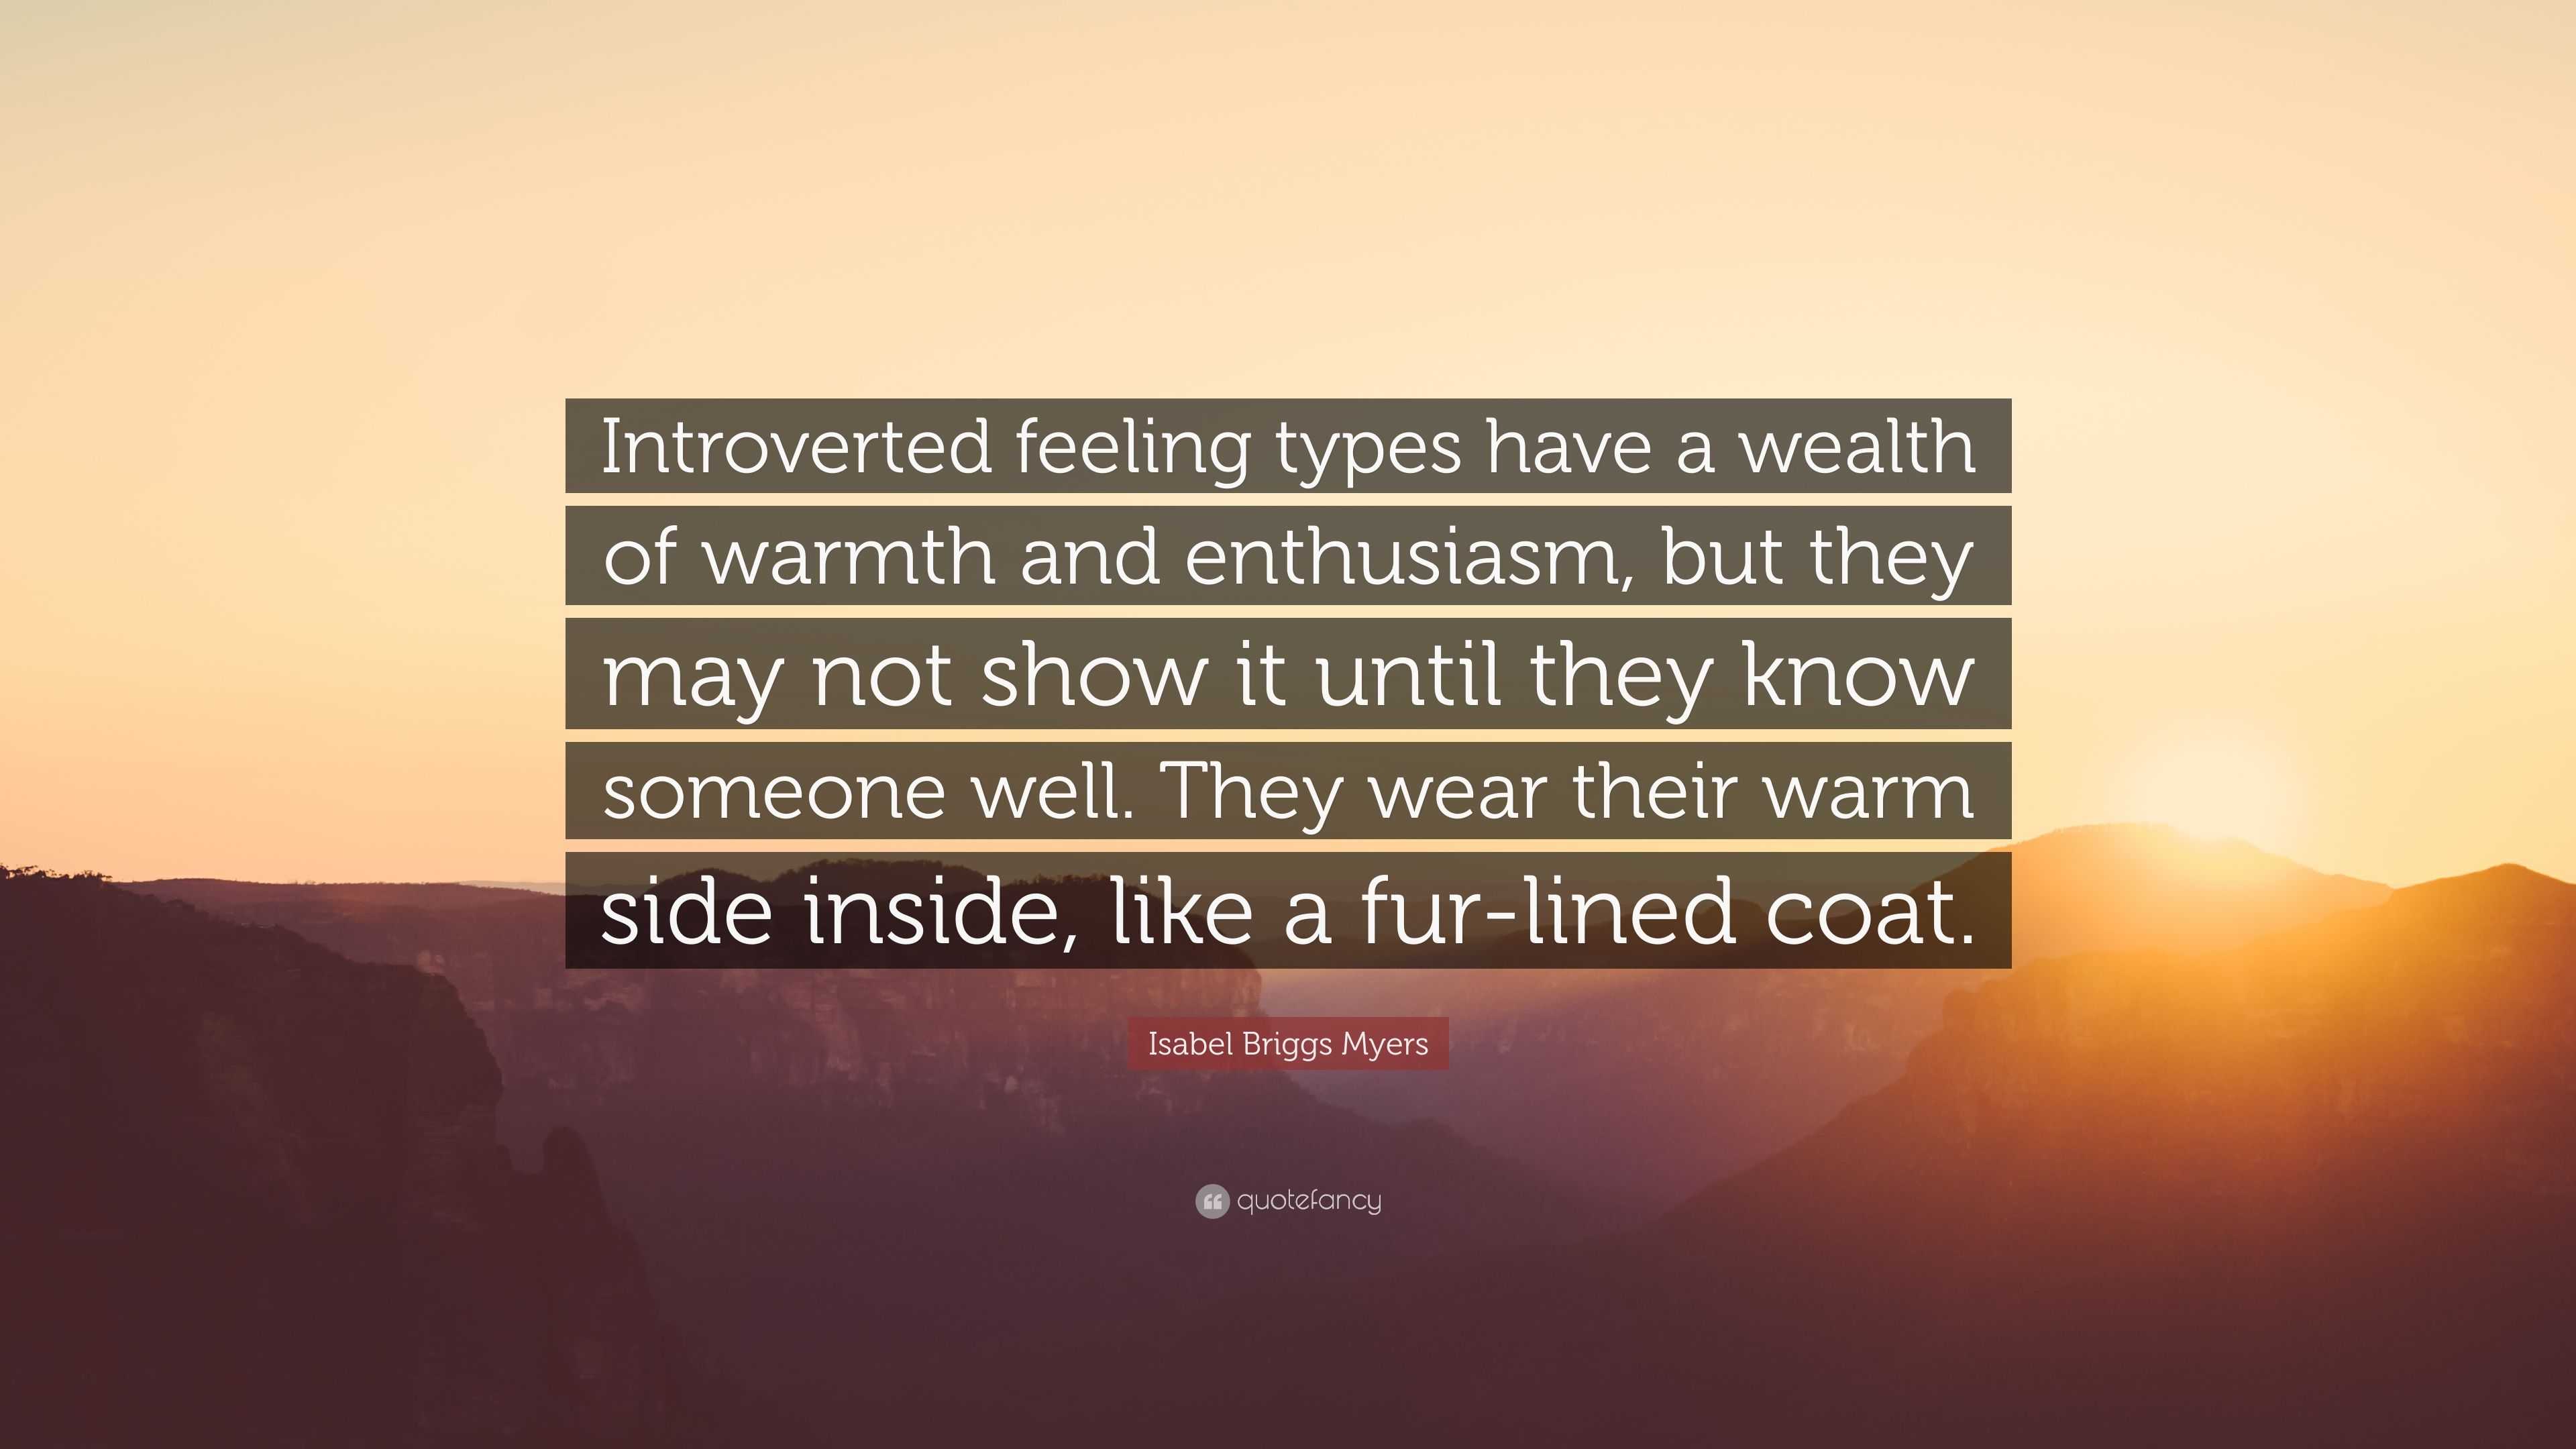 how to date someone who is introverted